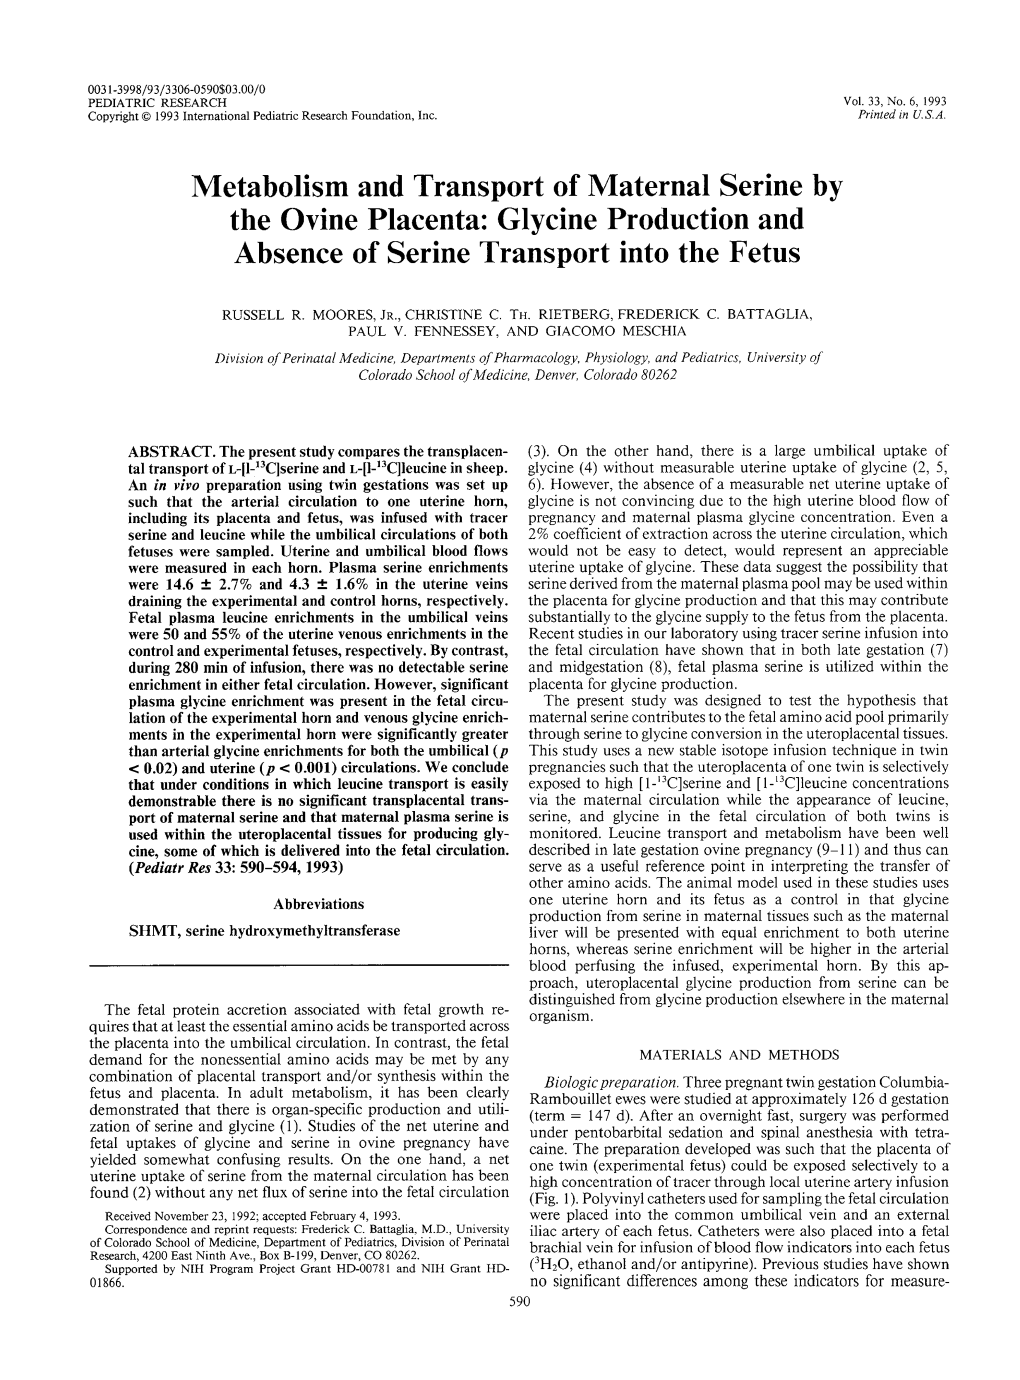 Metabolism and Transport of Maternal Serine by the Ovine Placenta: Glycine Production and Absence of Serine Transport Into the Fetus